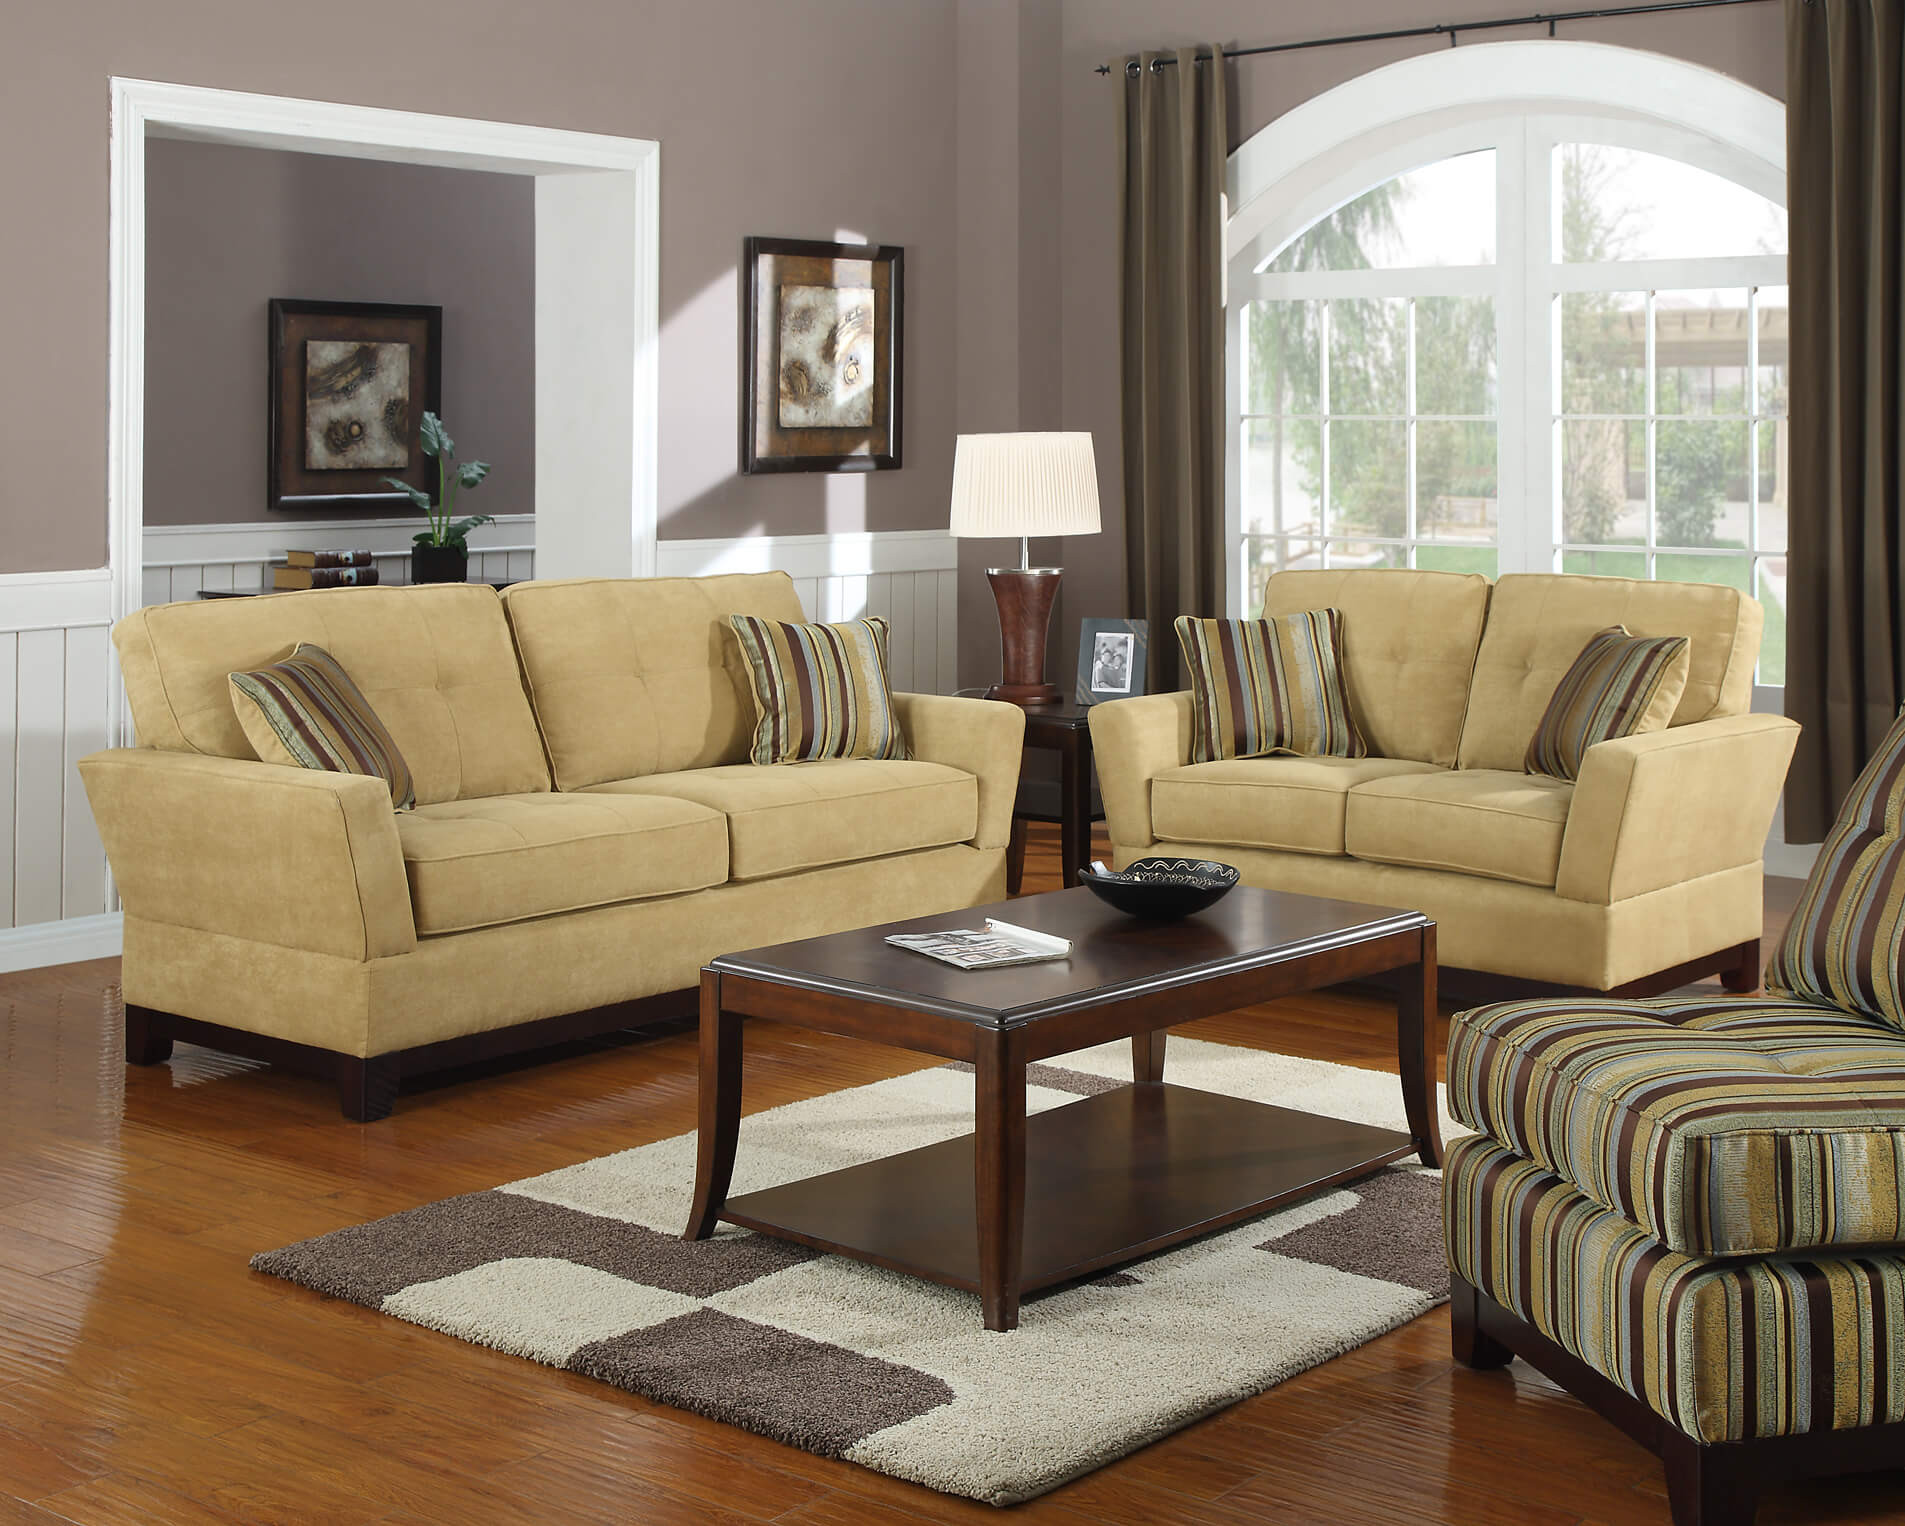 Couches For Small Living Room
 Simple Way to Decorate Small Living Room with Brown Color